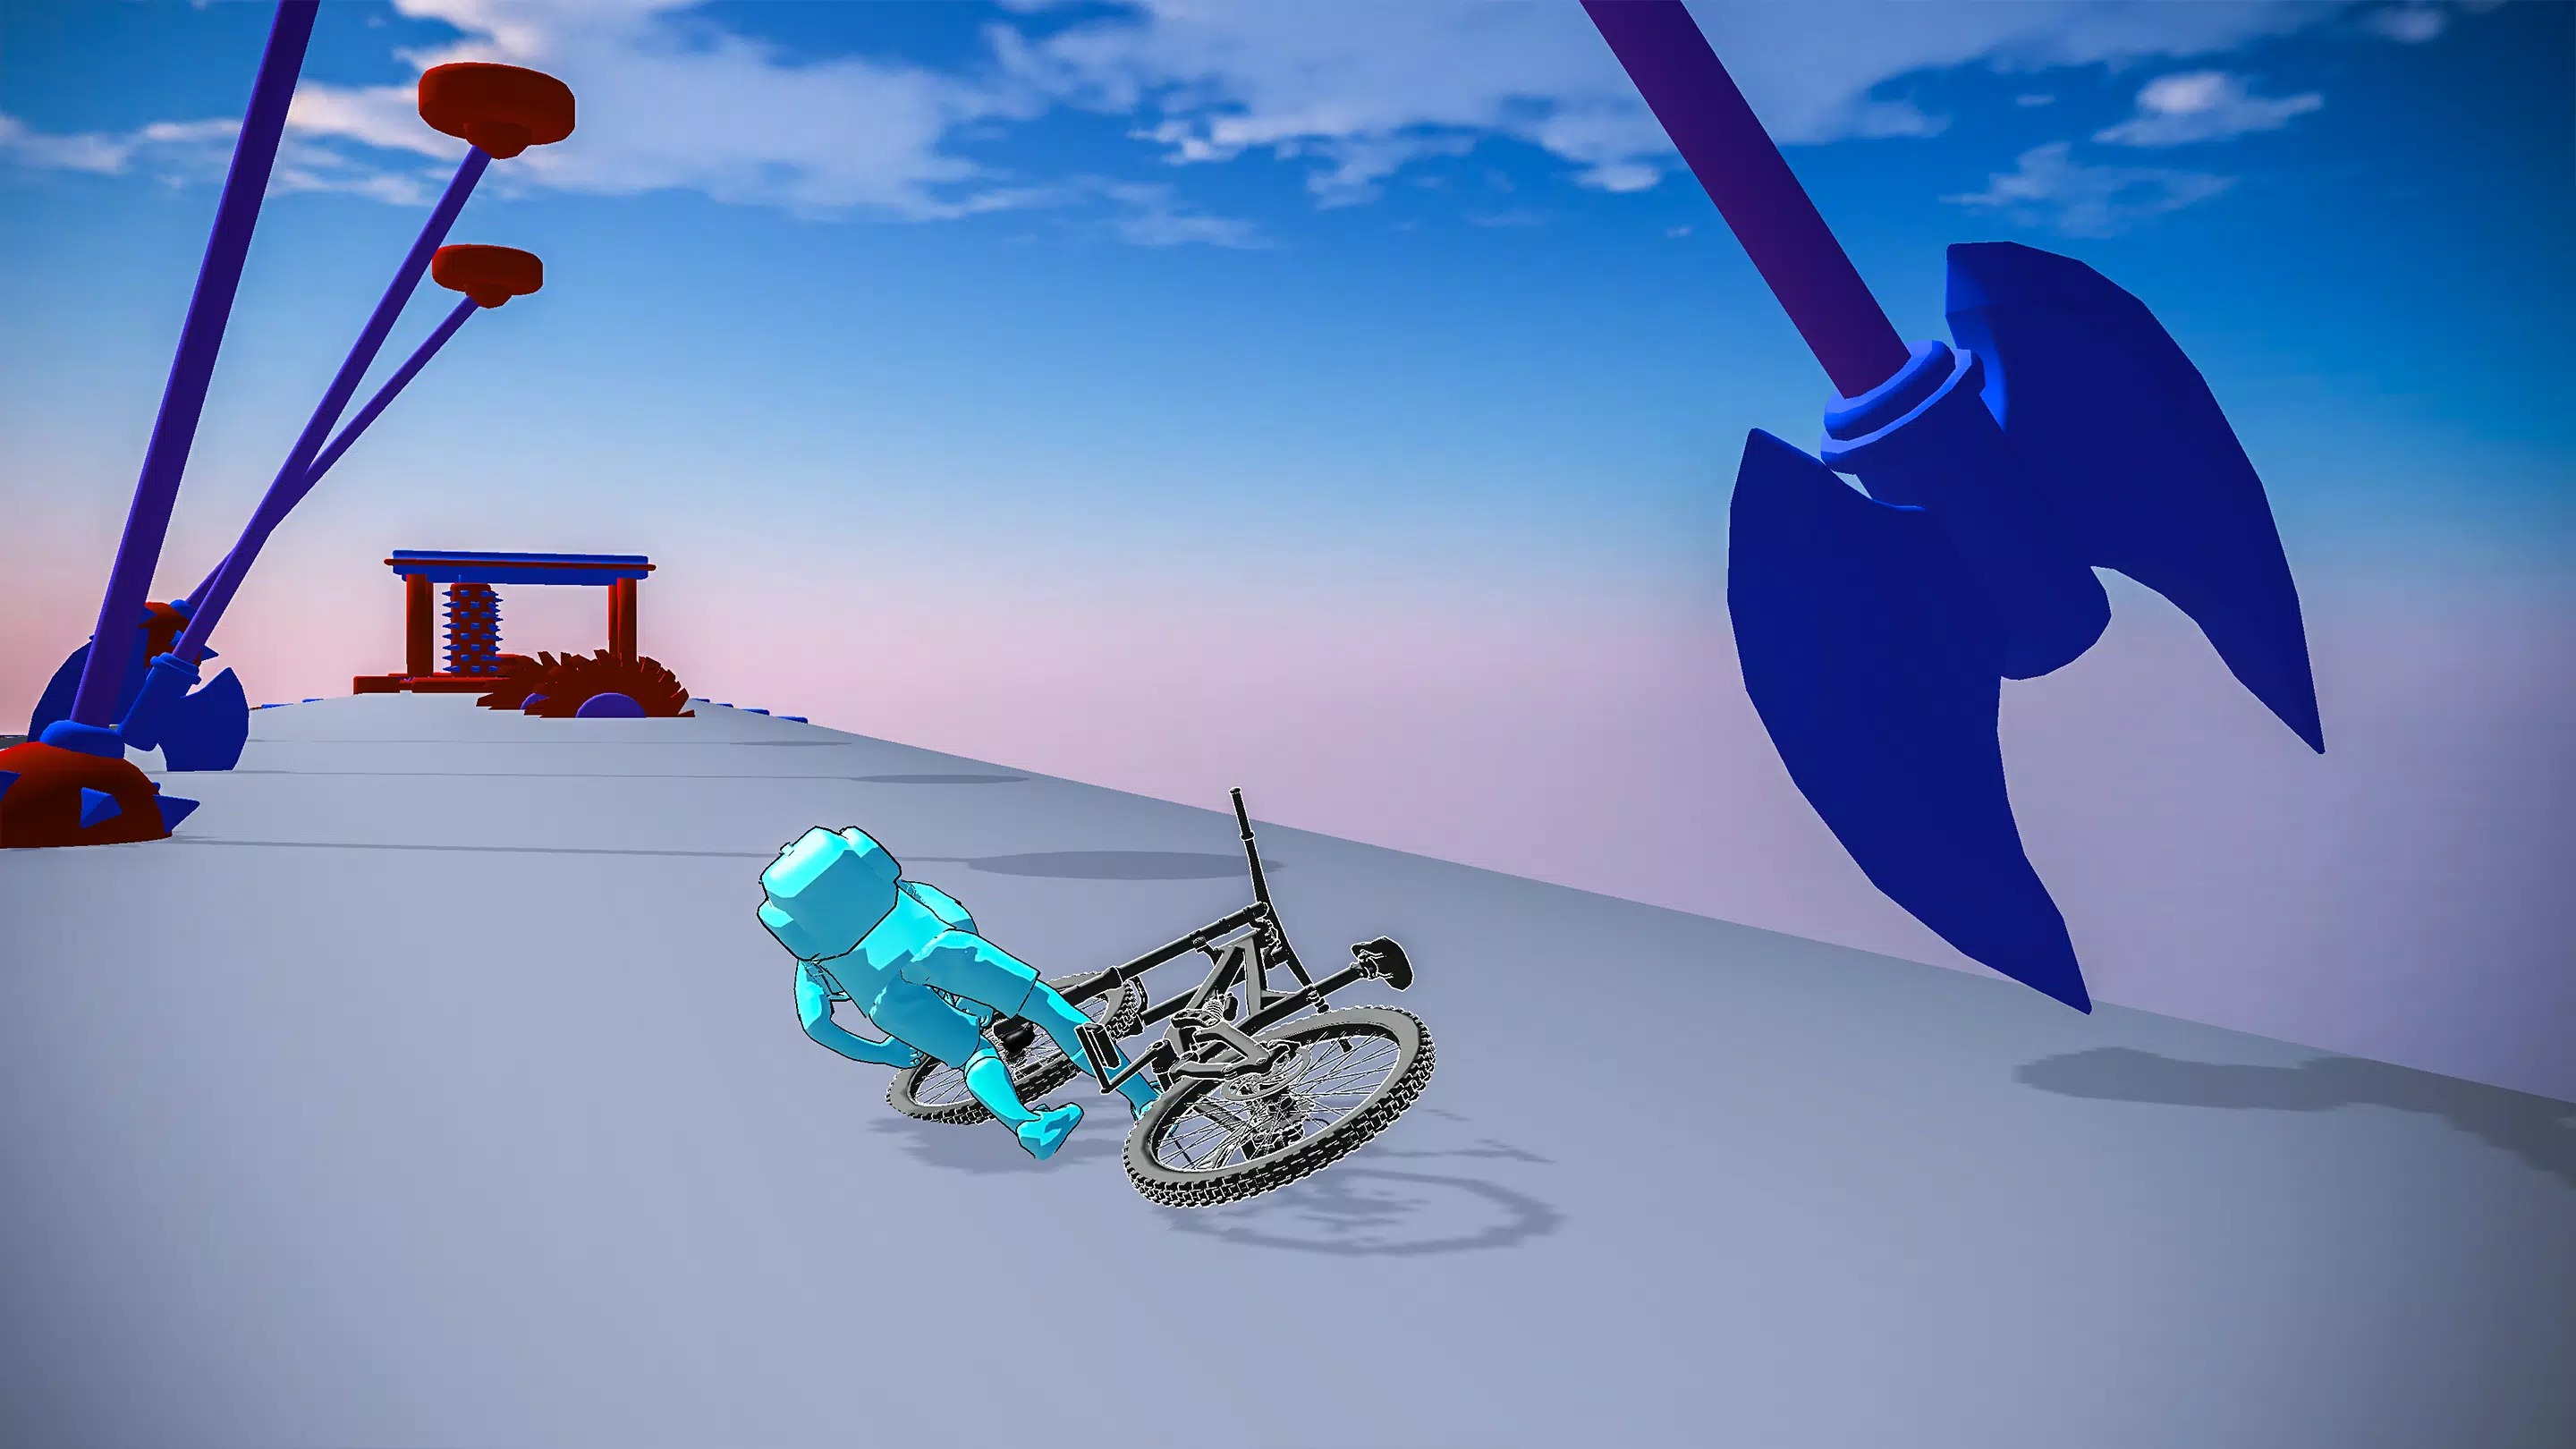 Bicycle Extreme Rider 3D APK